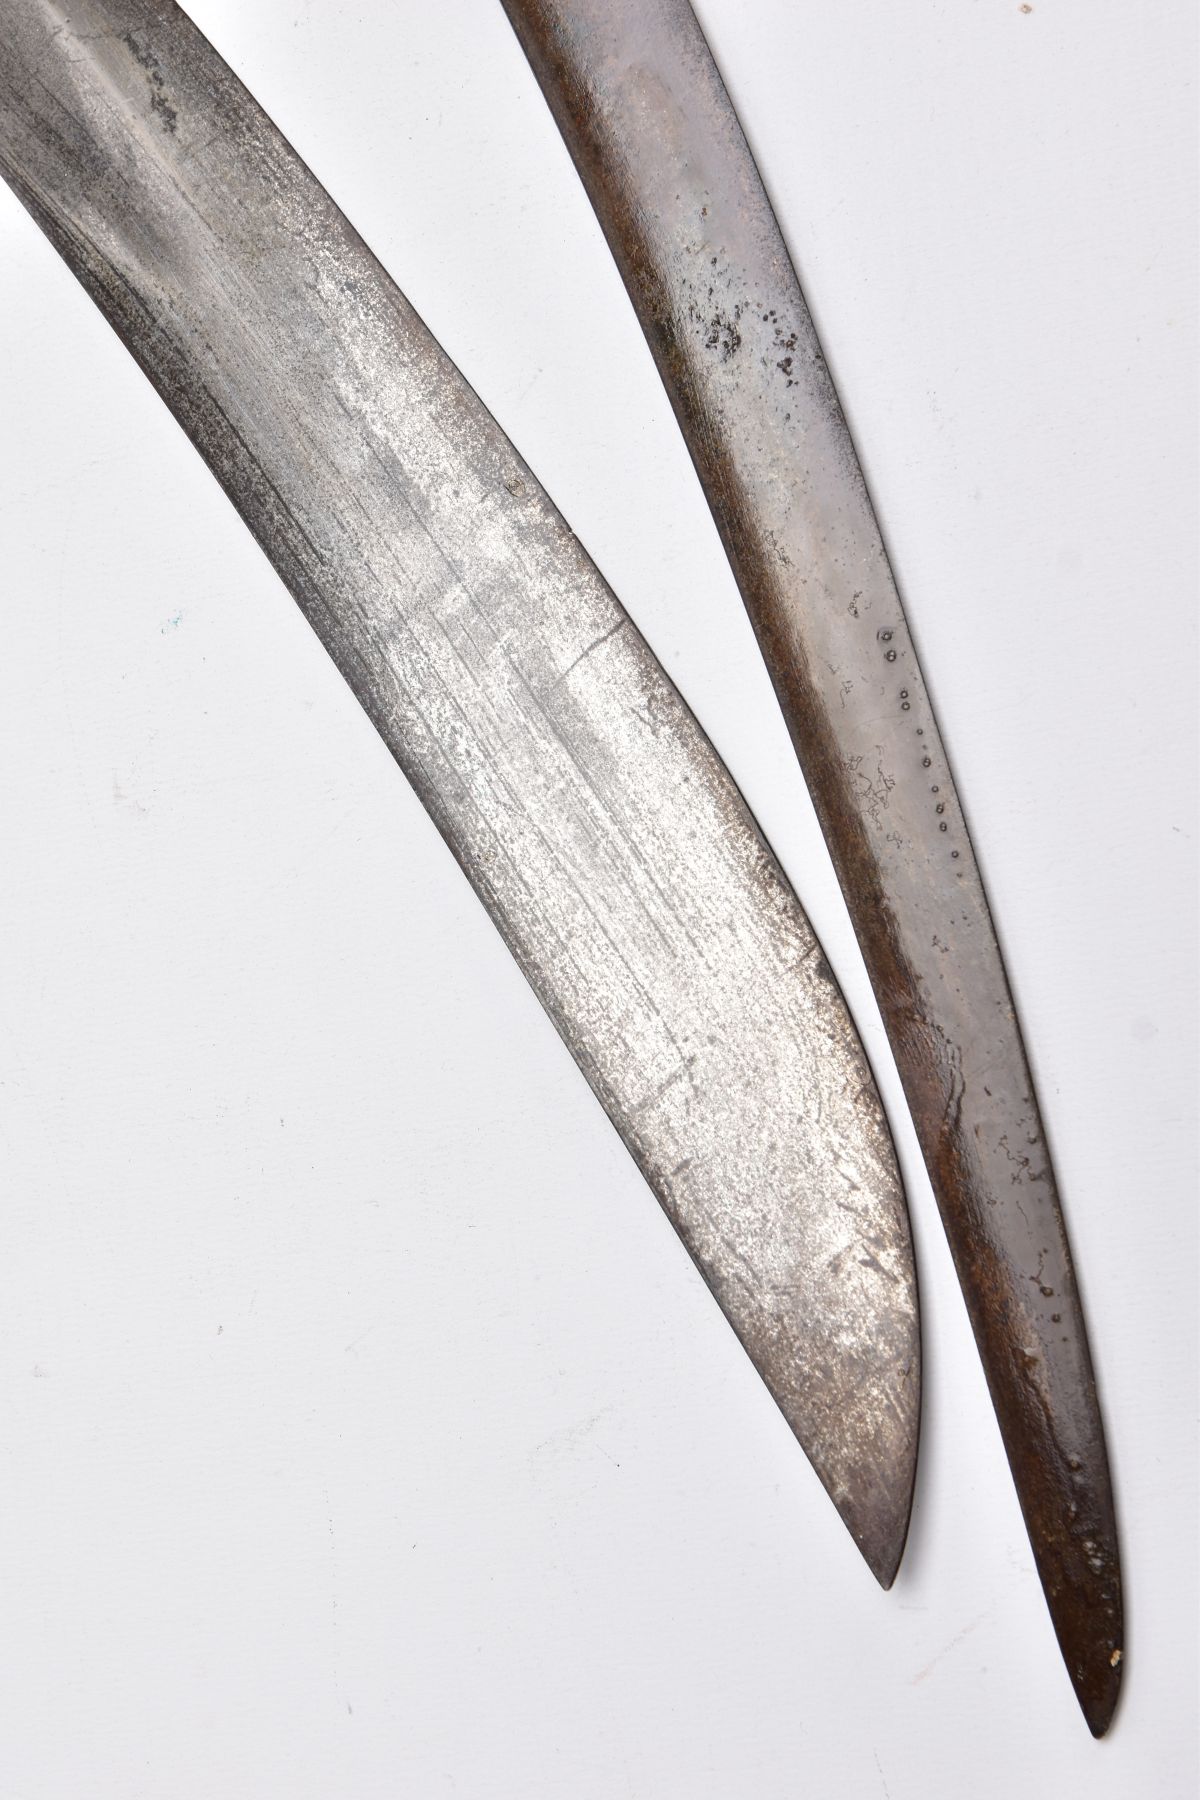 TWO LONG CURVED BLADE SWORDS, Eastern in design and looks, blade on one has been lacquered, etched - Image 6 of 10